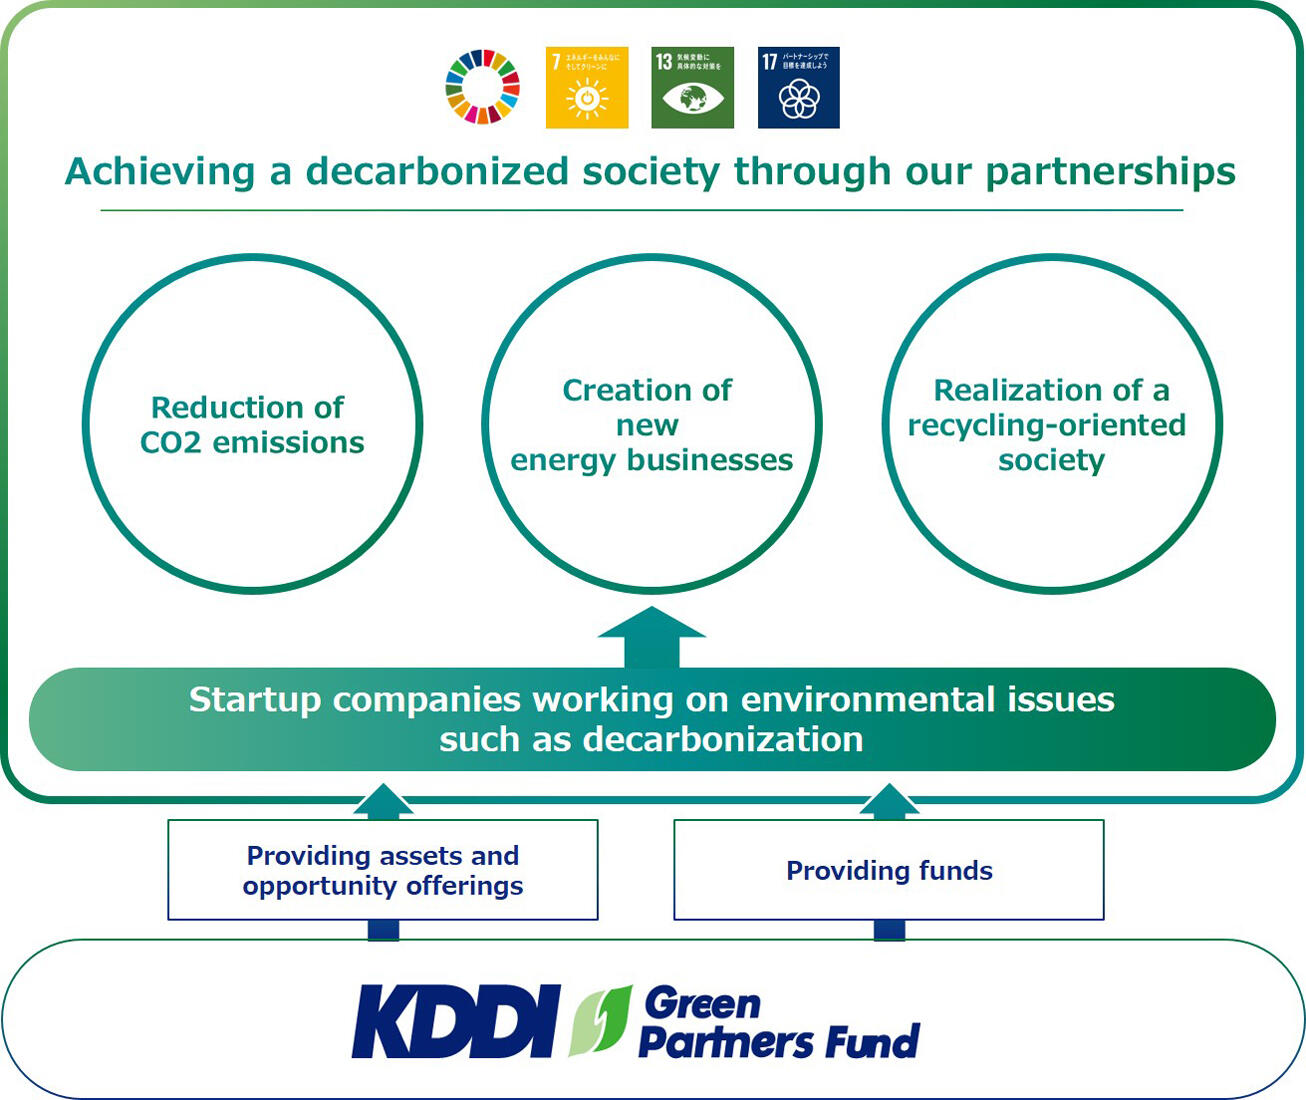 Achieving a decarbonized society through our partnerships